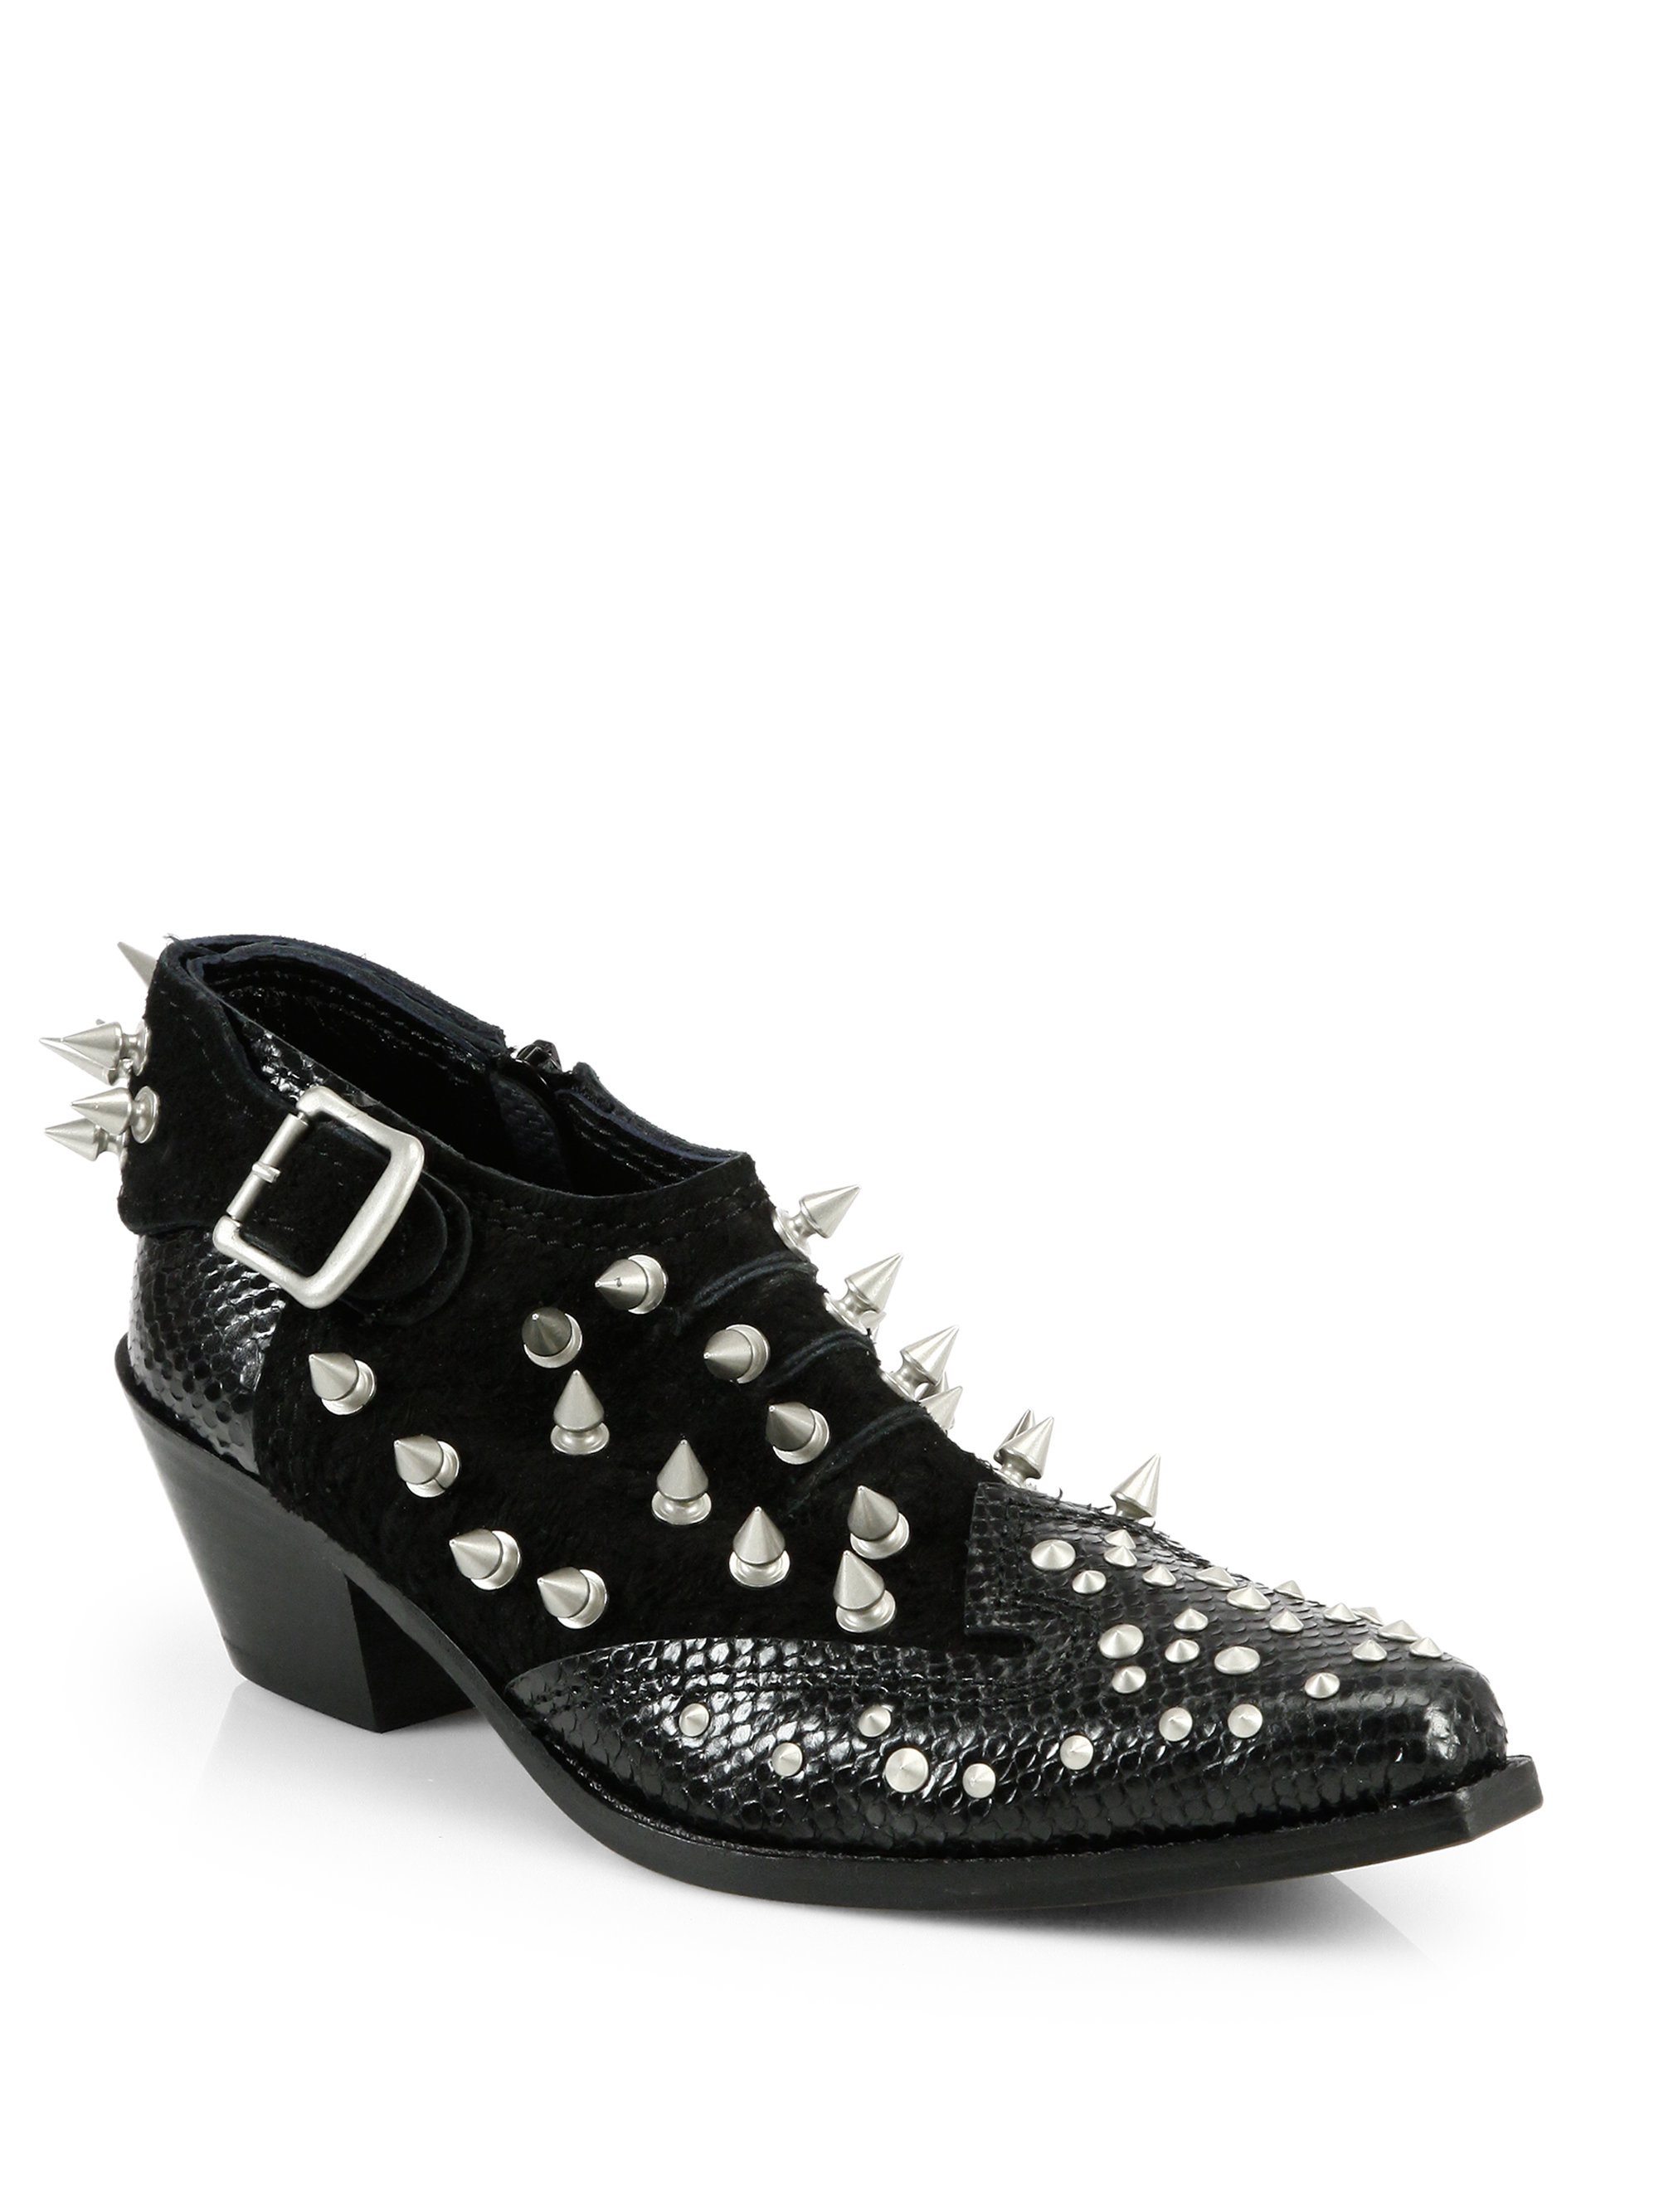 Junya Watanabe Studded Snakeskin Suede Ankle Boots in Black - Lyst